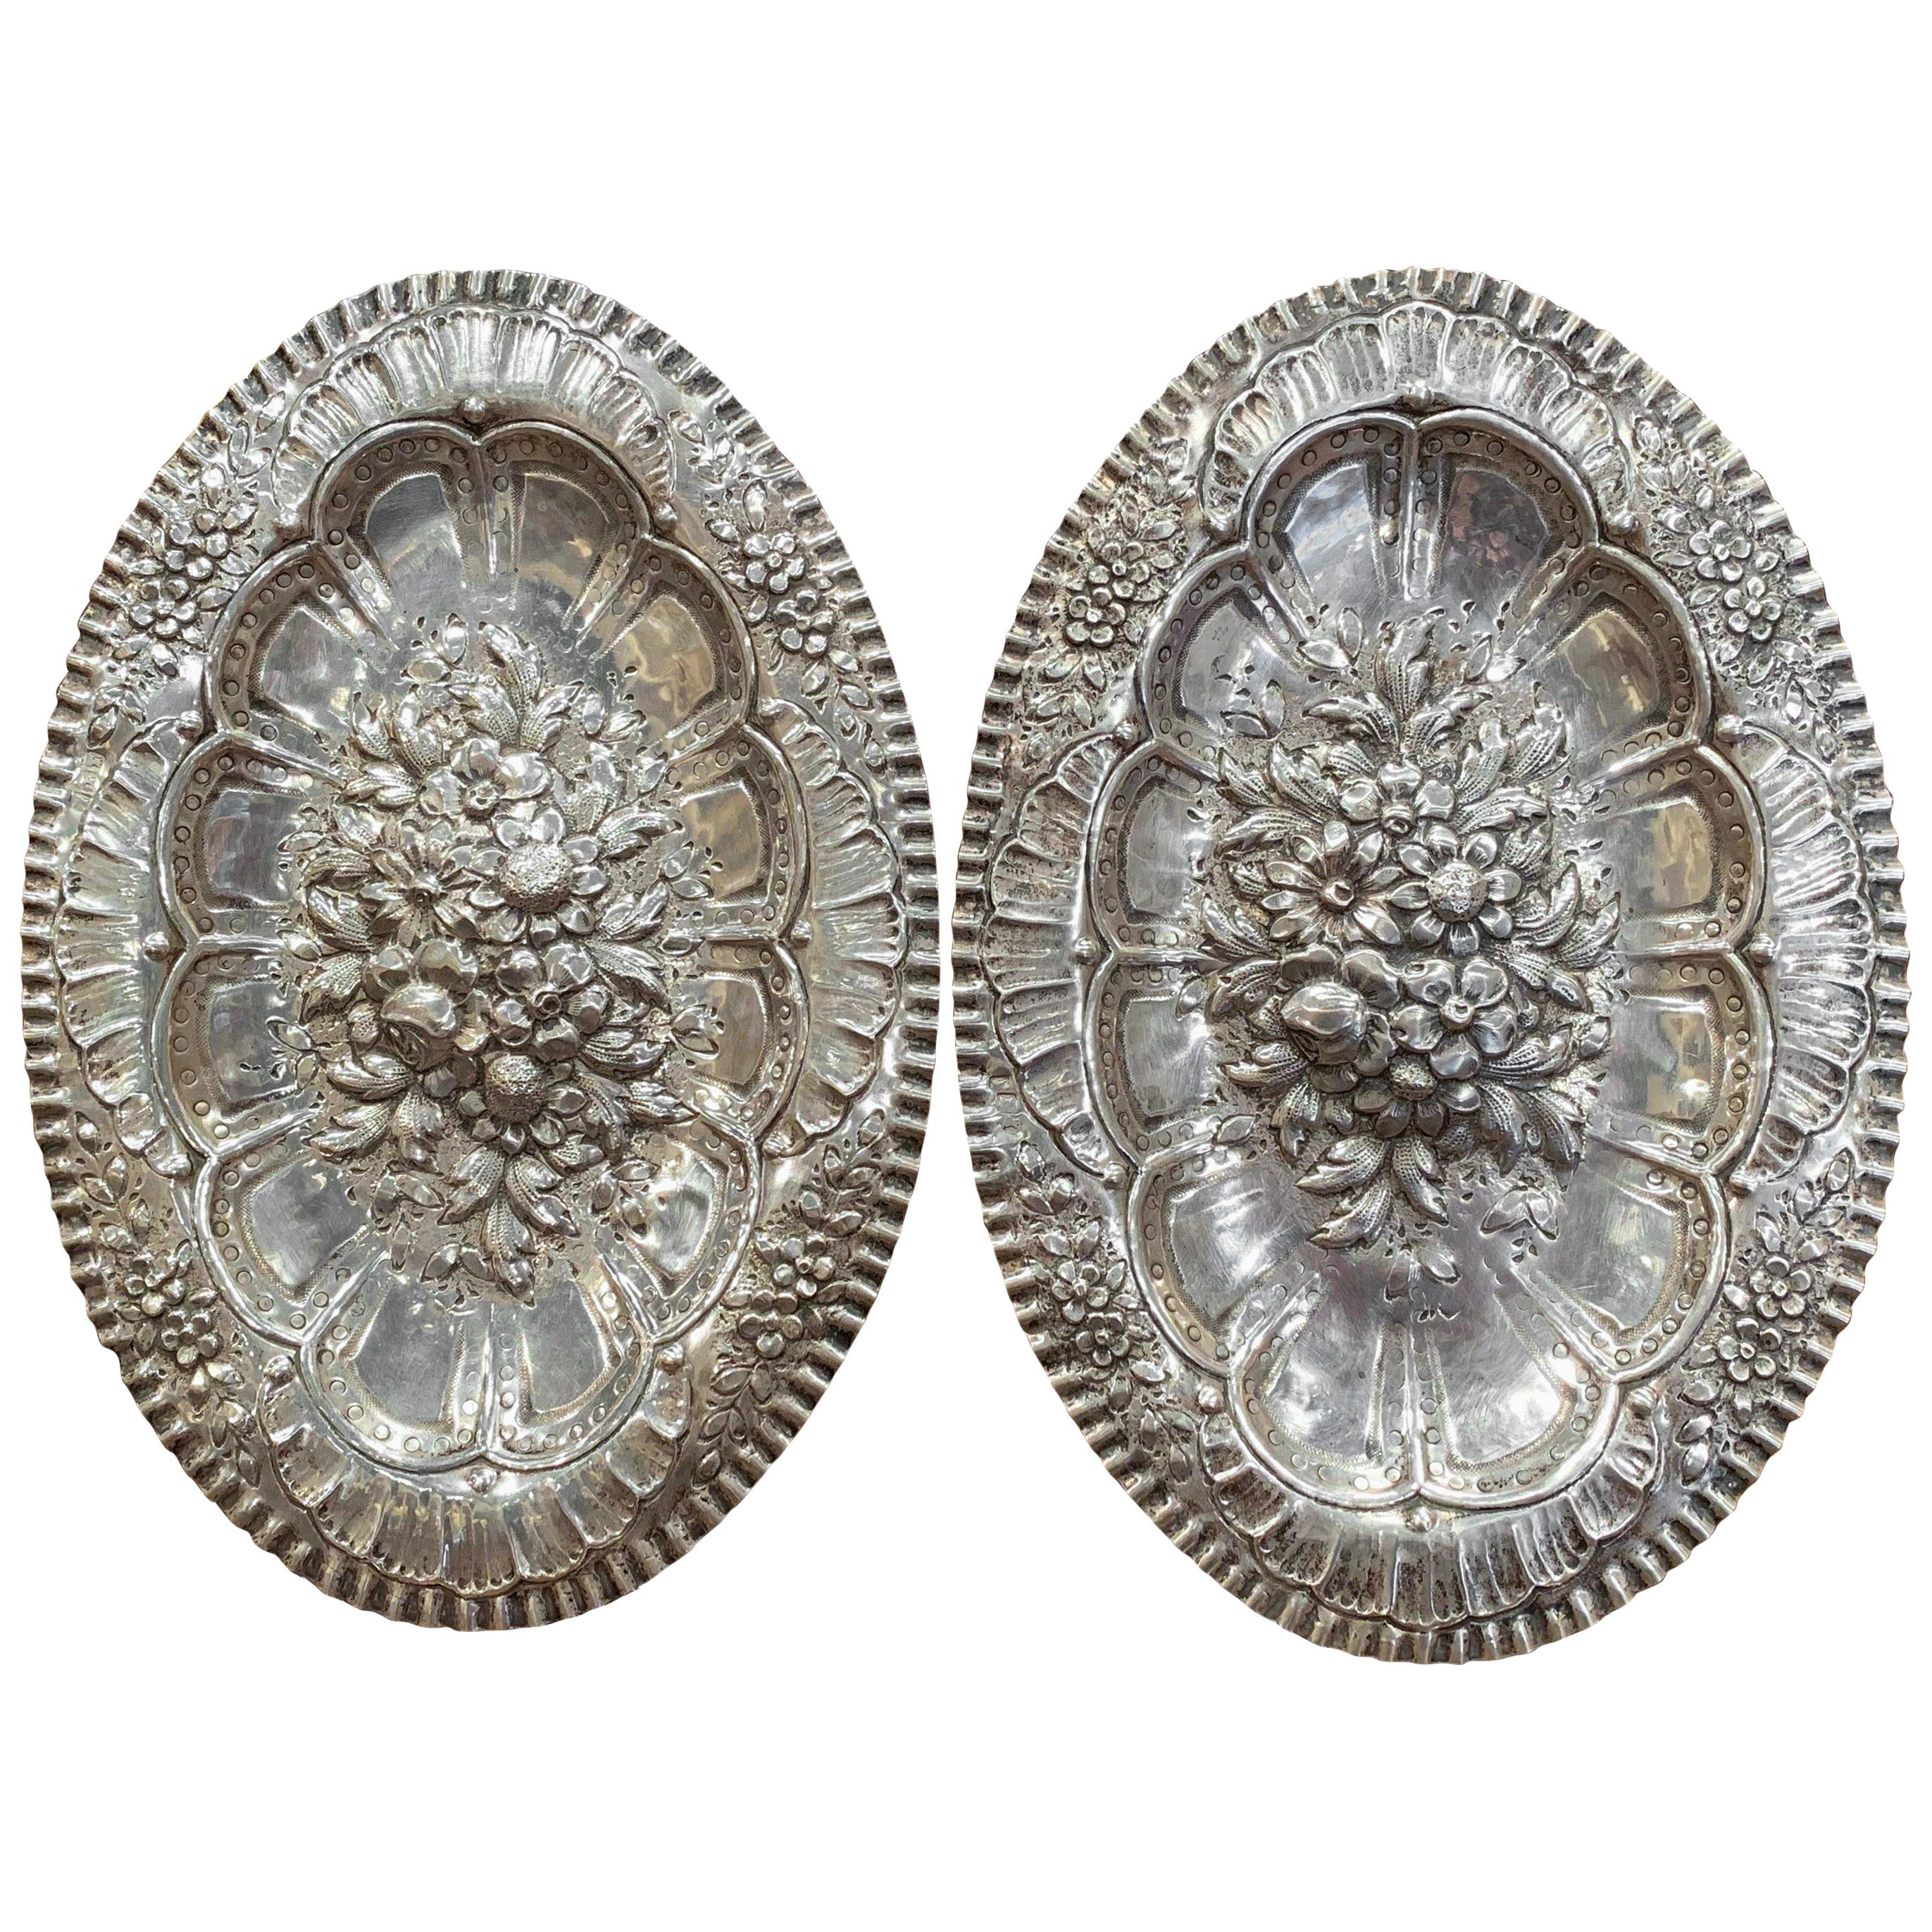 Pair of 19th Century French Repousse Silver Oval Wall Plaques